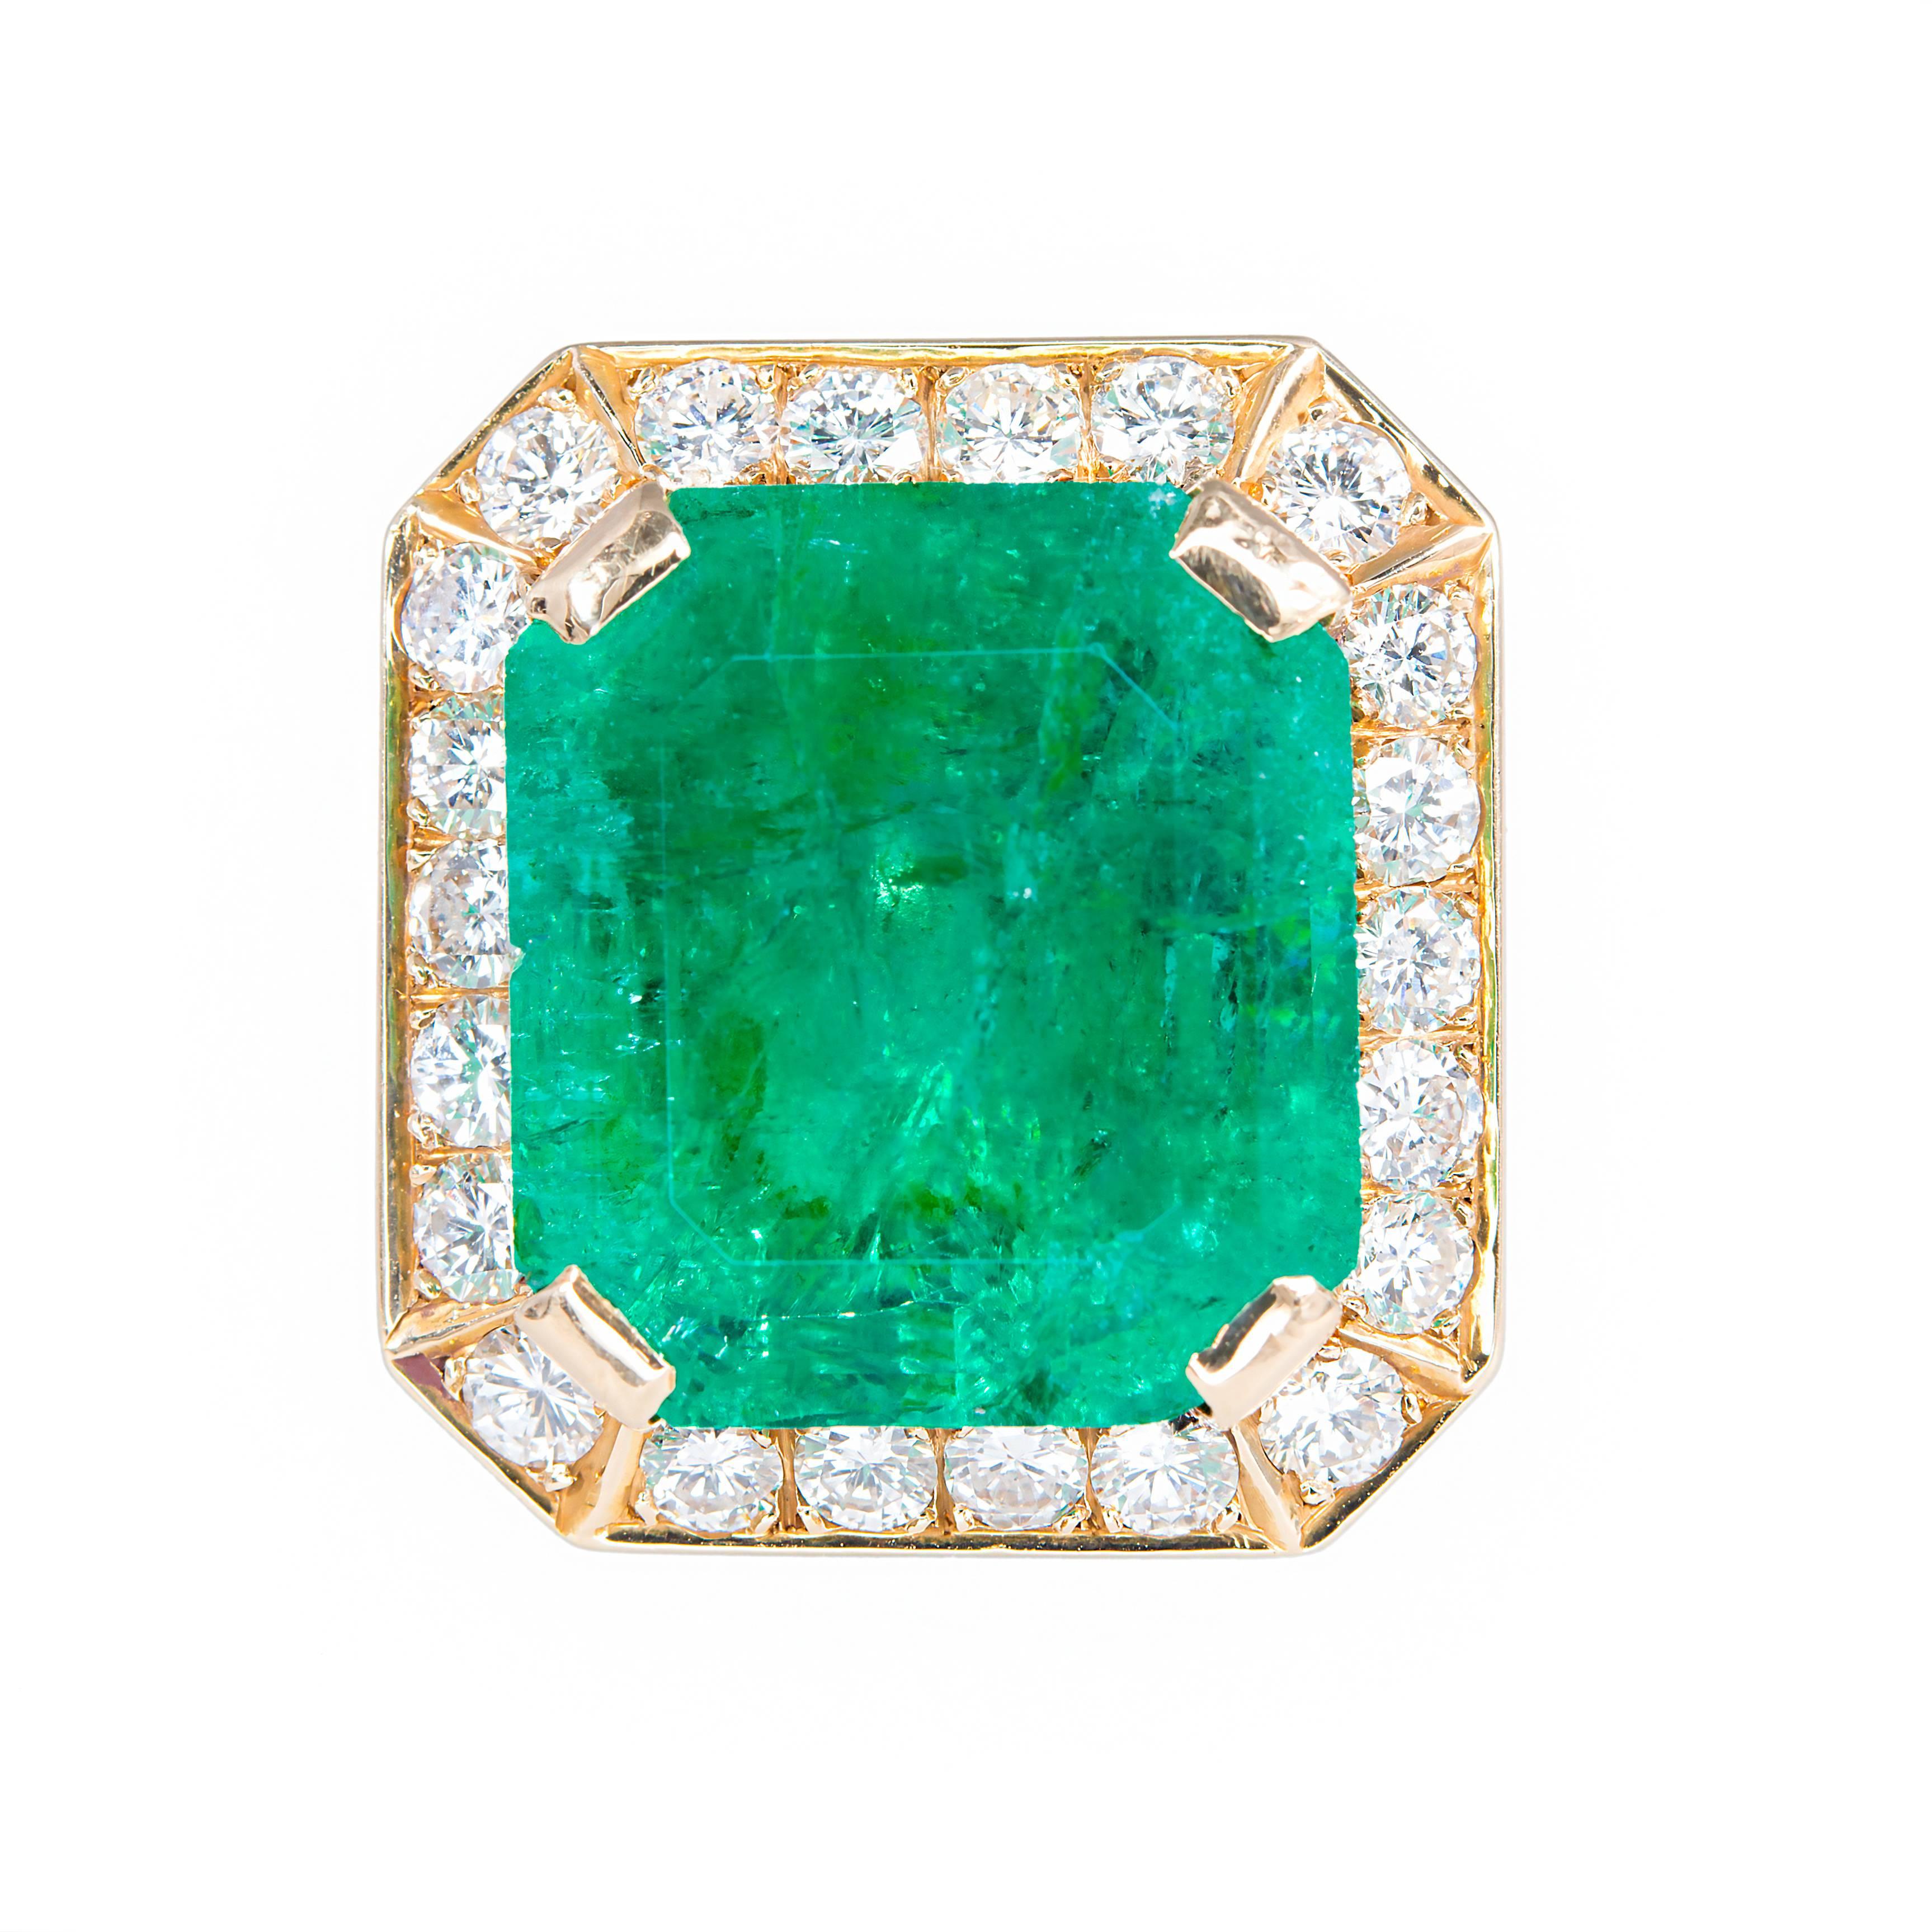 Handmade 14k yellow gold eight sided emerald ring. GIA certified 18.75ct emerald center stone with a halo of 22 round diamonds in a 14k yellow gold setting. Mid-century, 1960's. 
 
1 square step cut Colombian Emerald approx. total weight 18.75cts.